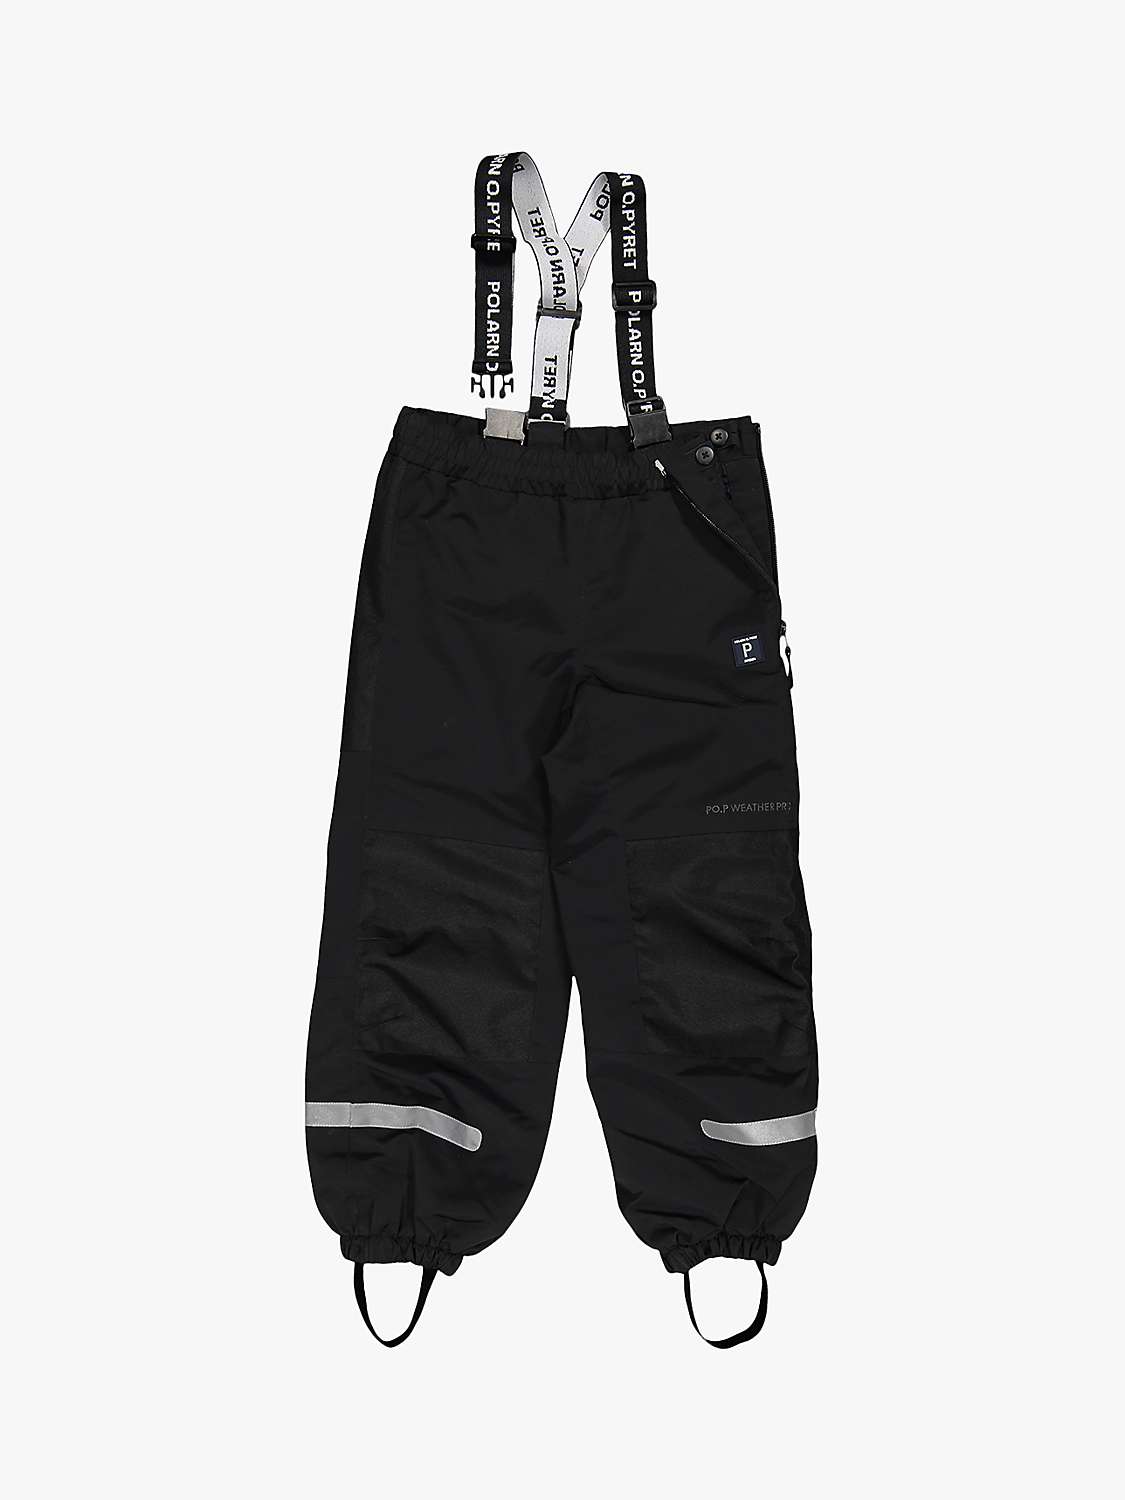 Buy Polarn O. Pyret Kids' Waterproof Trousers Online at johnlewis.com